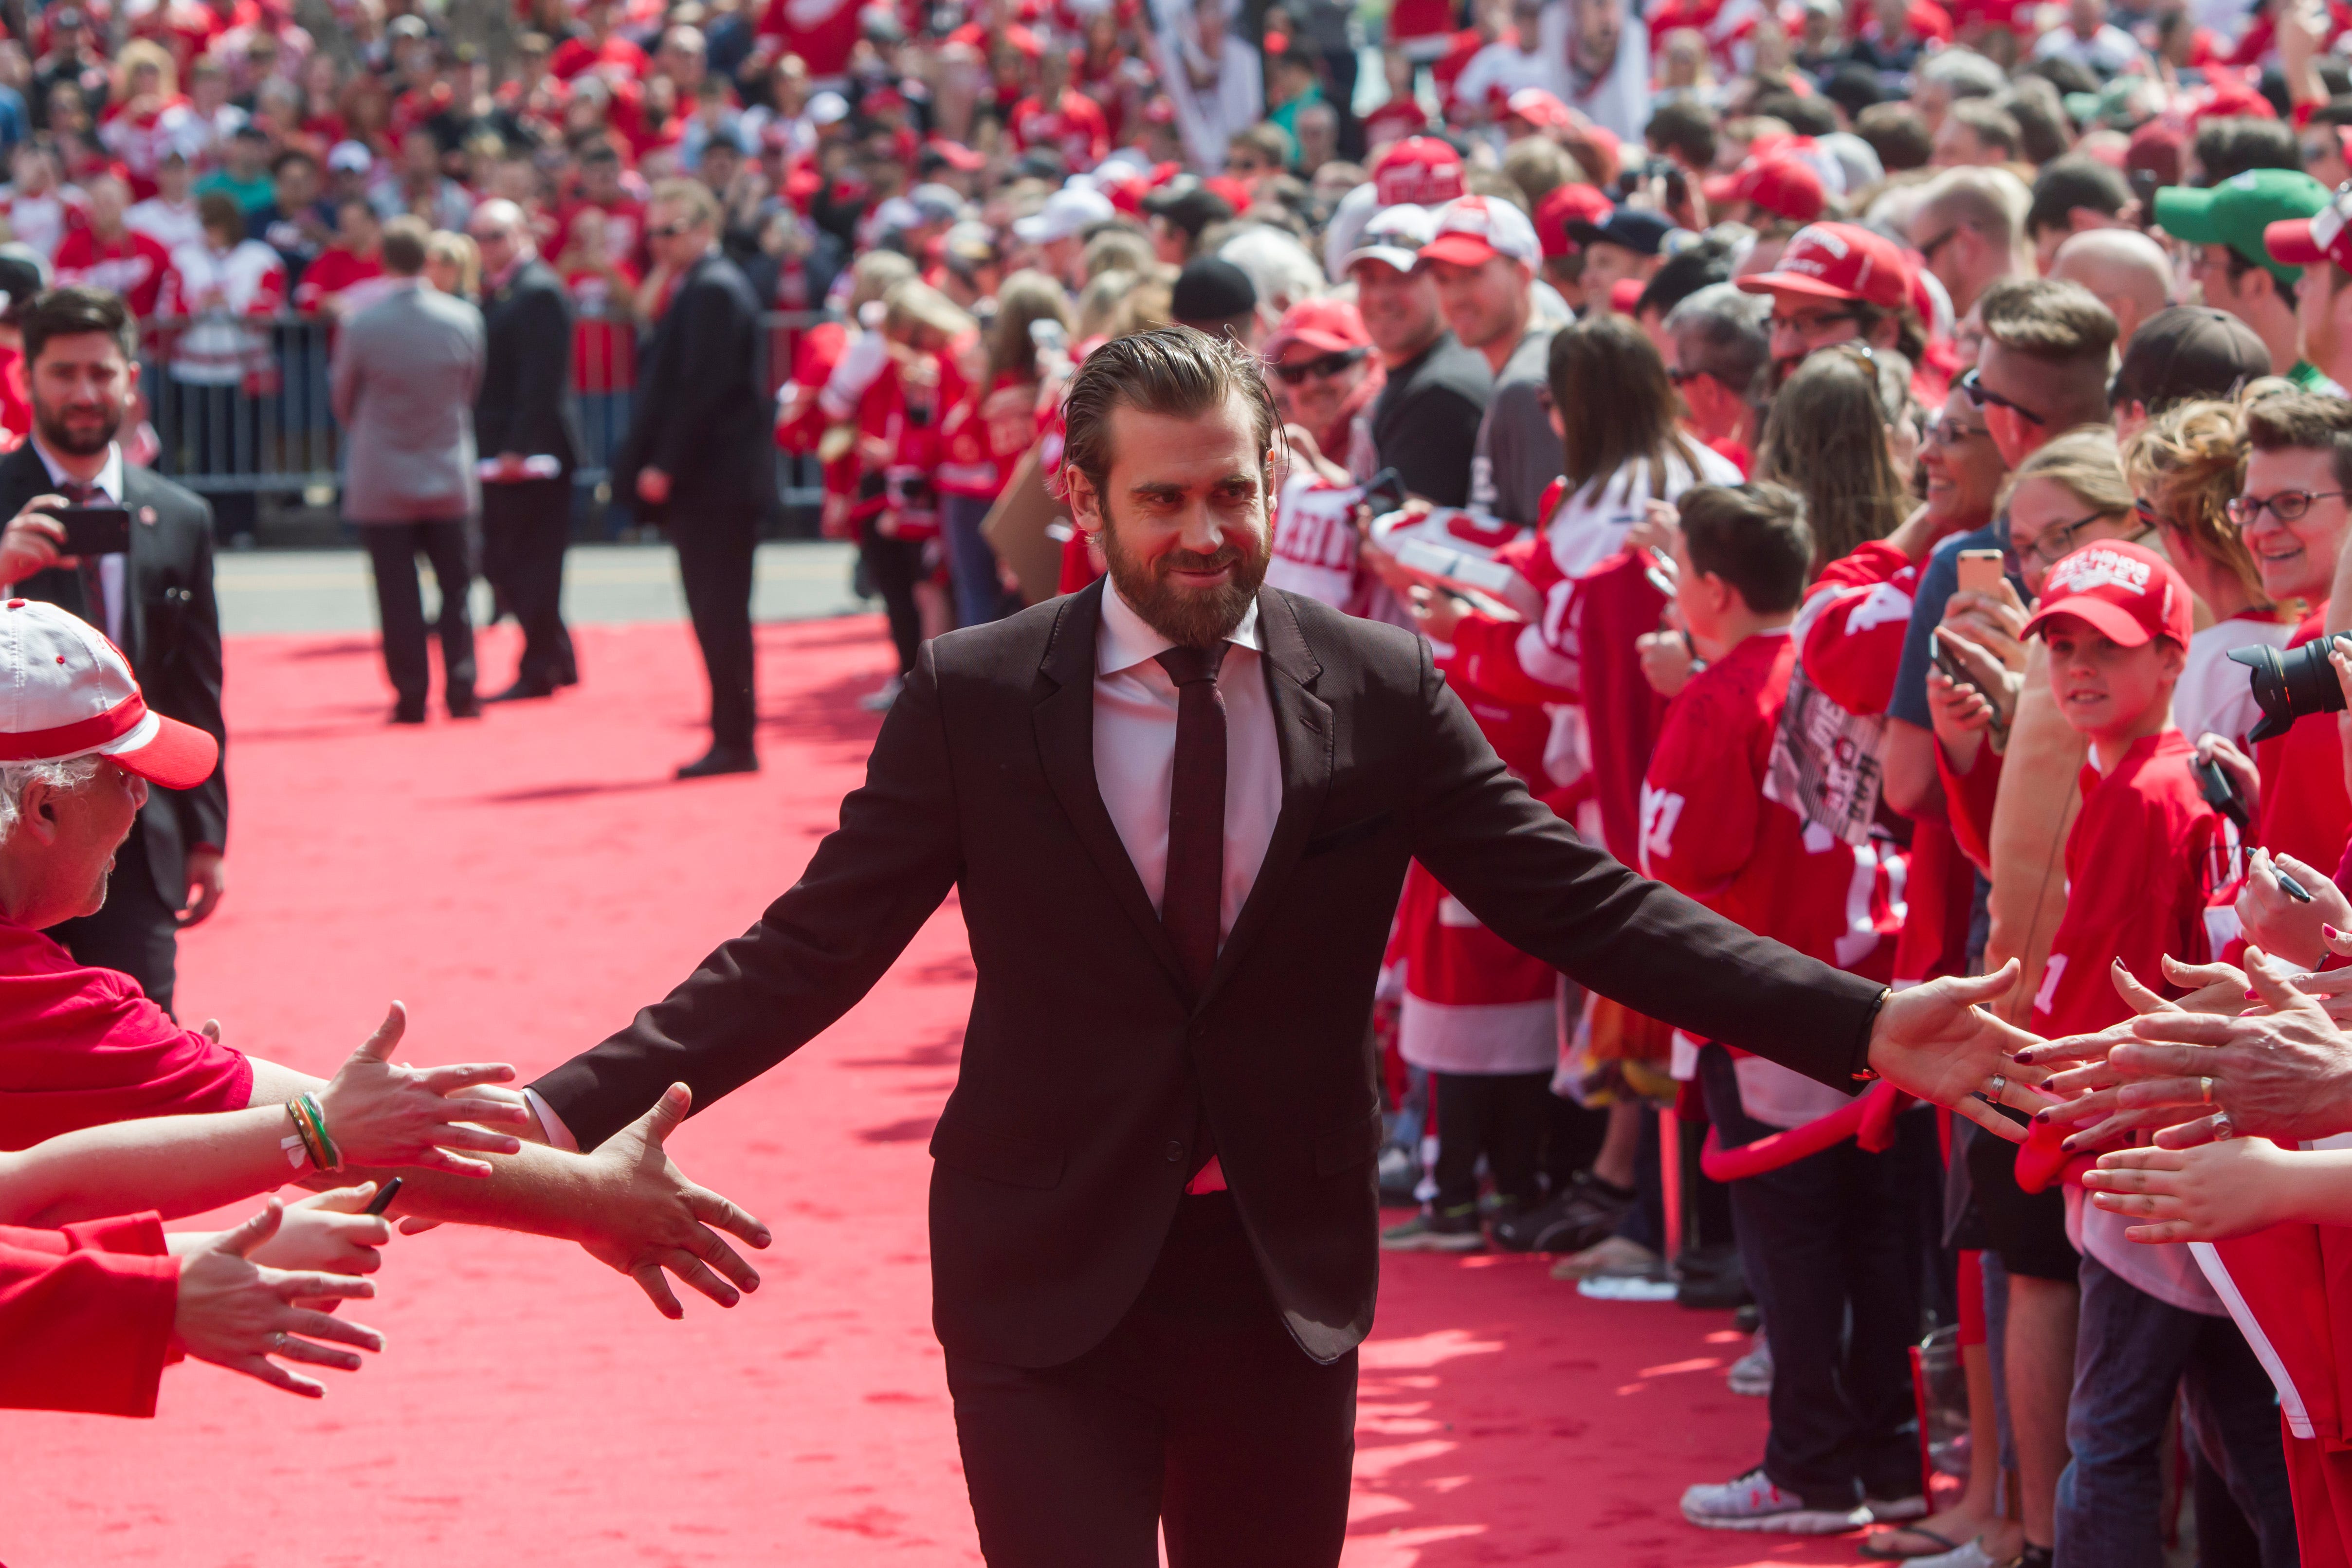 Captain Henrik Zetterberg high-fives the fans while walking down the red carpet before the final game at Joe Louis Arena against the New Jersey Devils April 1, 2017.